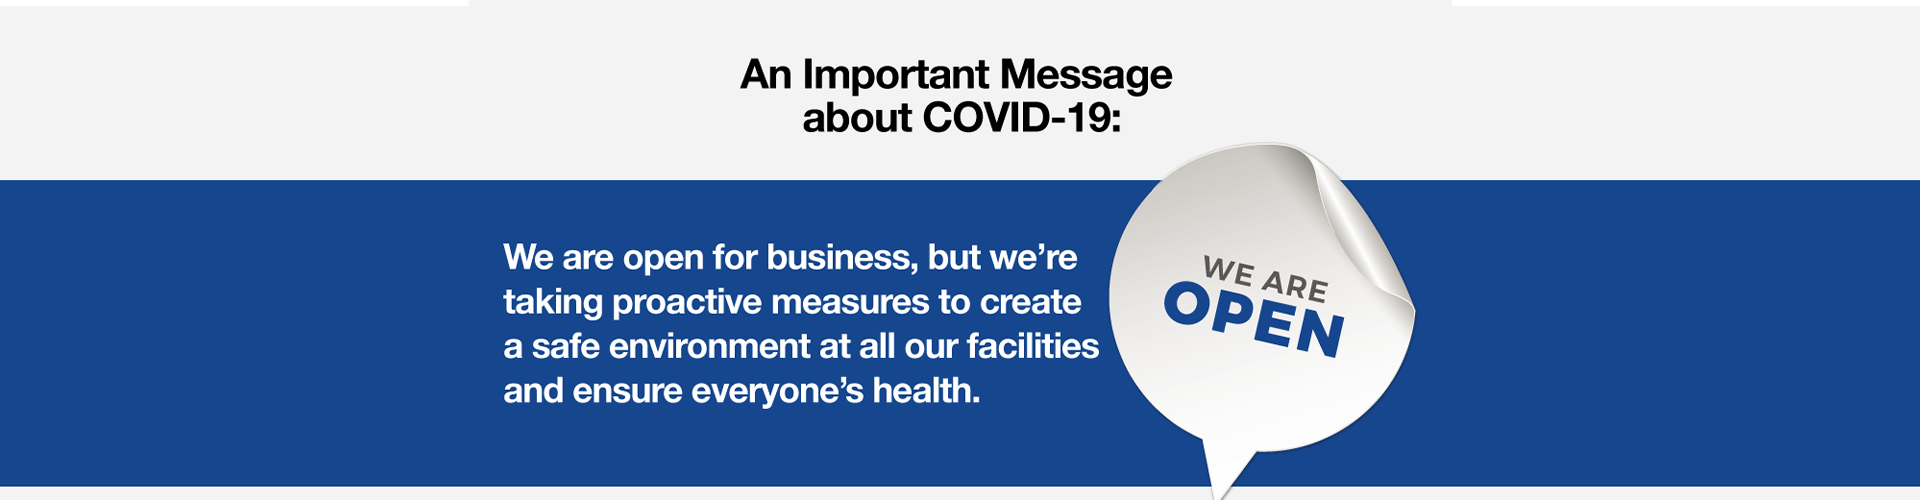 Important Message About Covid-19